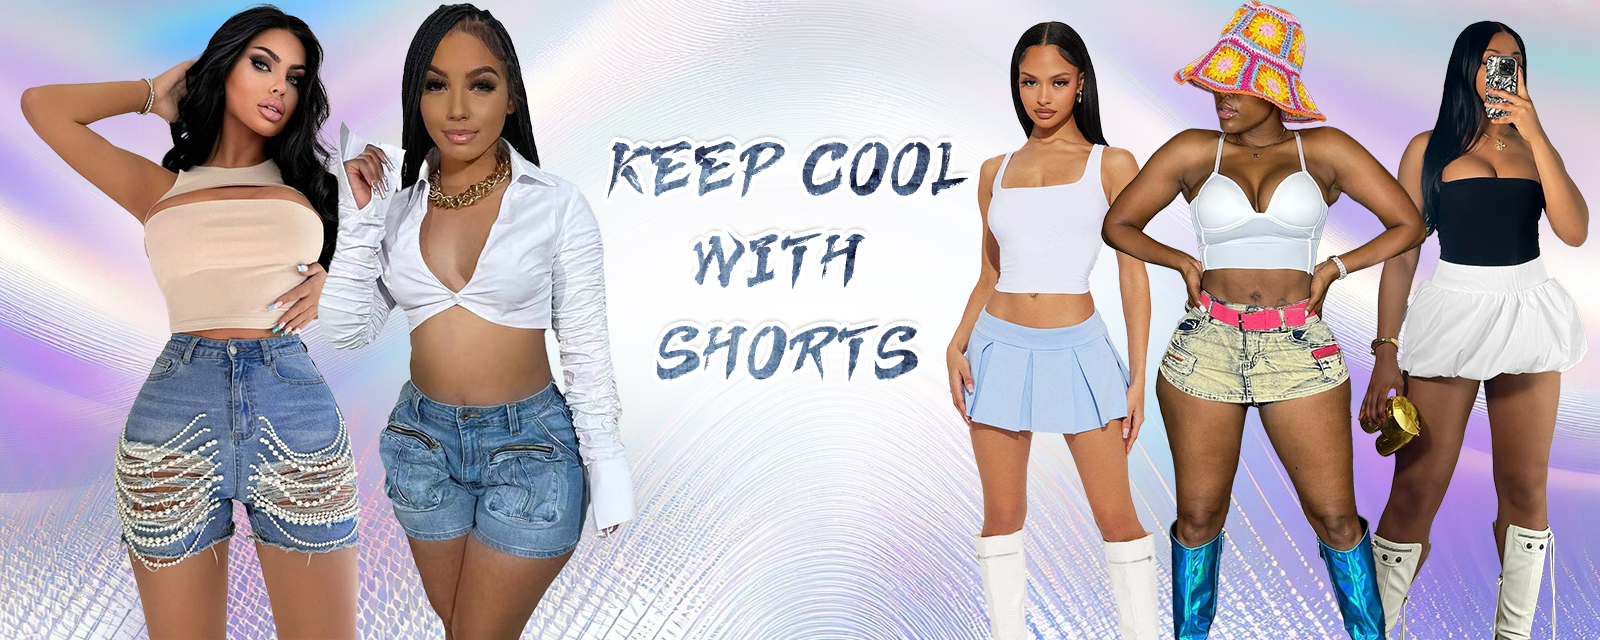 Keep cool with shorts